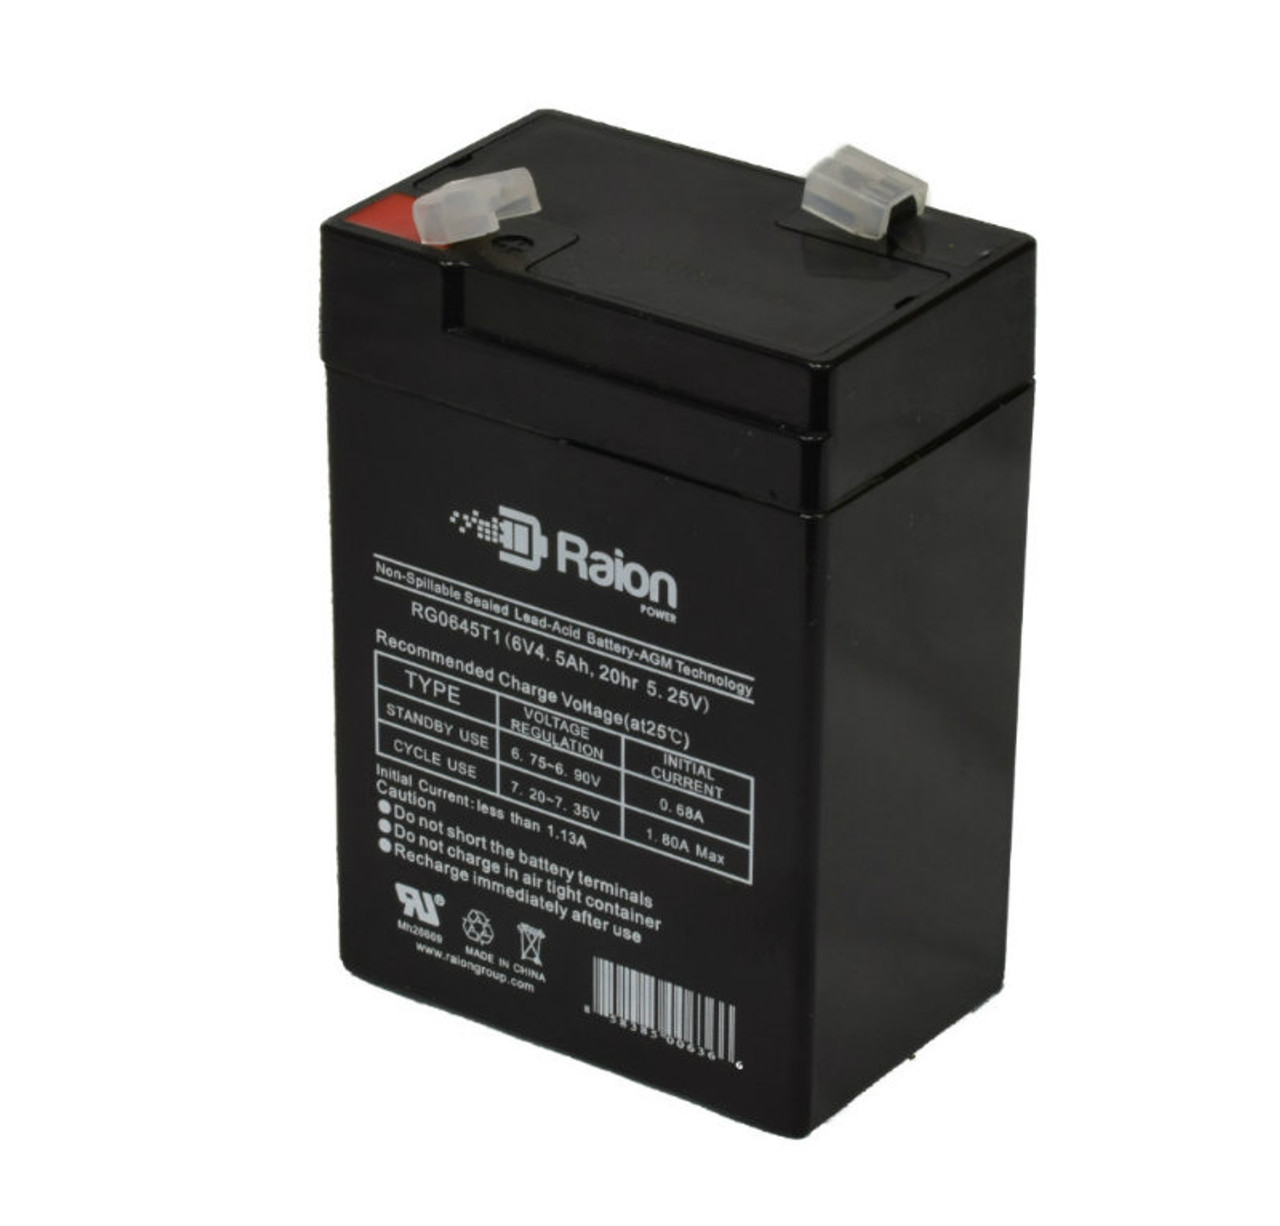 Raion Power RG0645T1 6V 4.5Ah Replacement Battery Cartridge for Criticare Systems 504 Pulse Oximeter